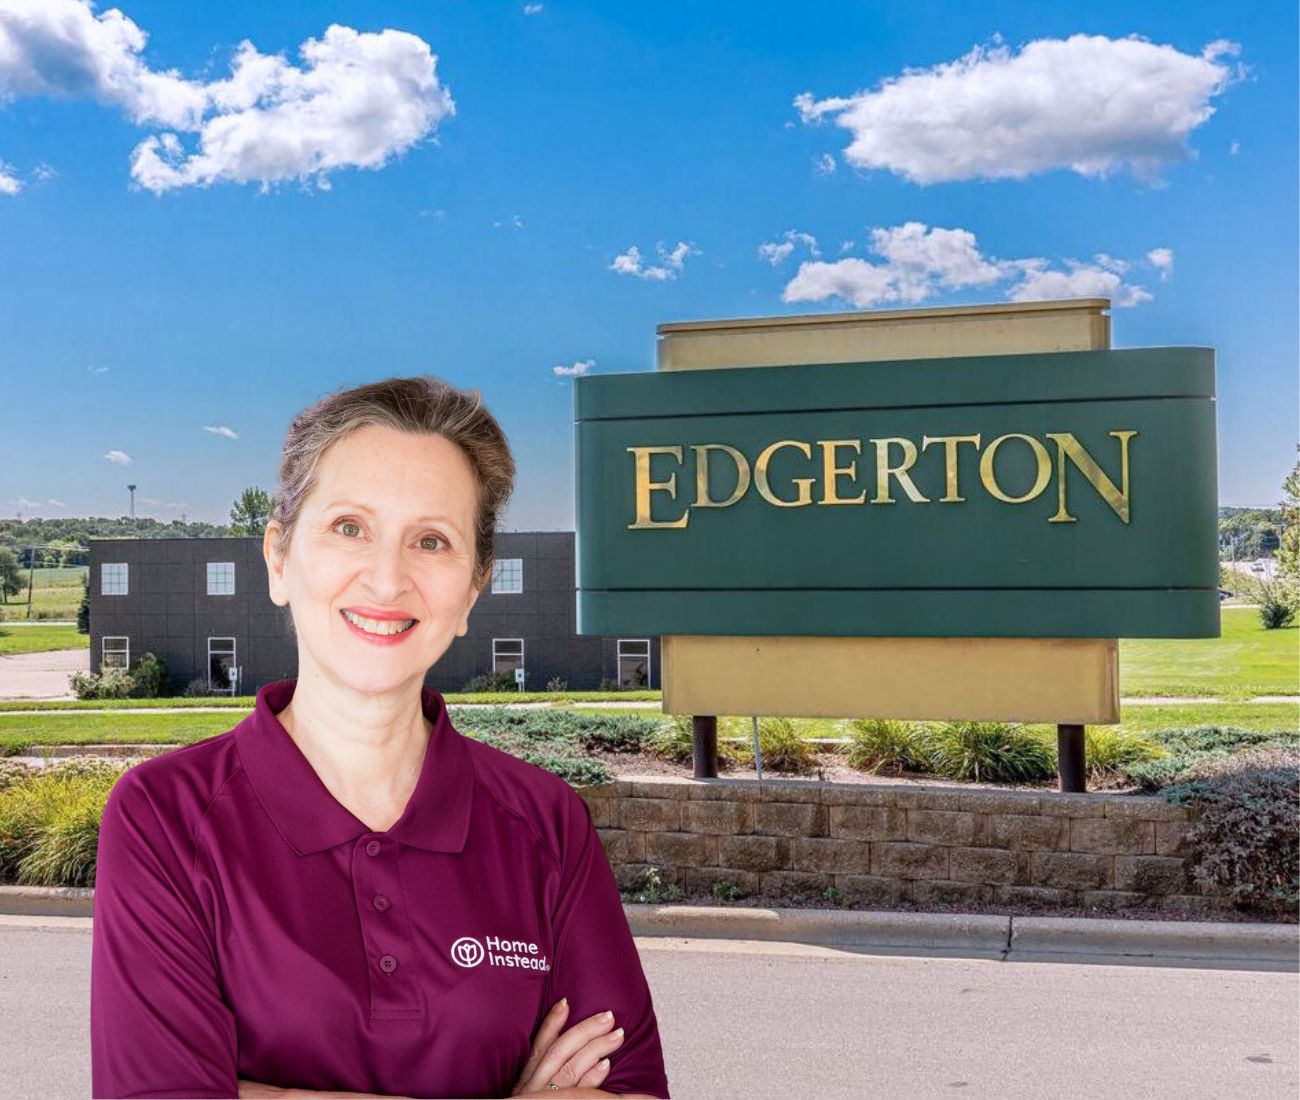 Home Instead caregiver with Edgerton Wisconsin in the background